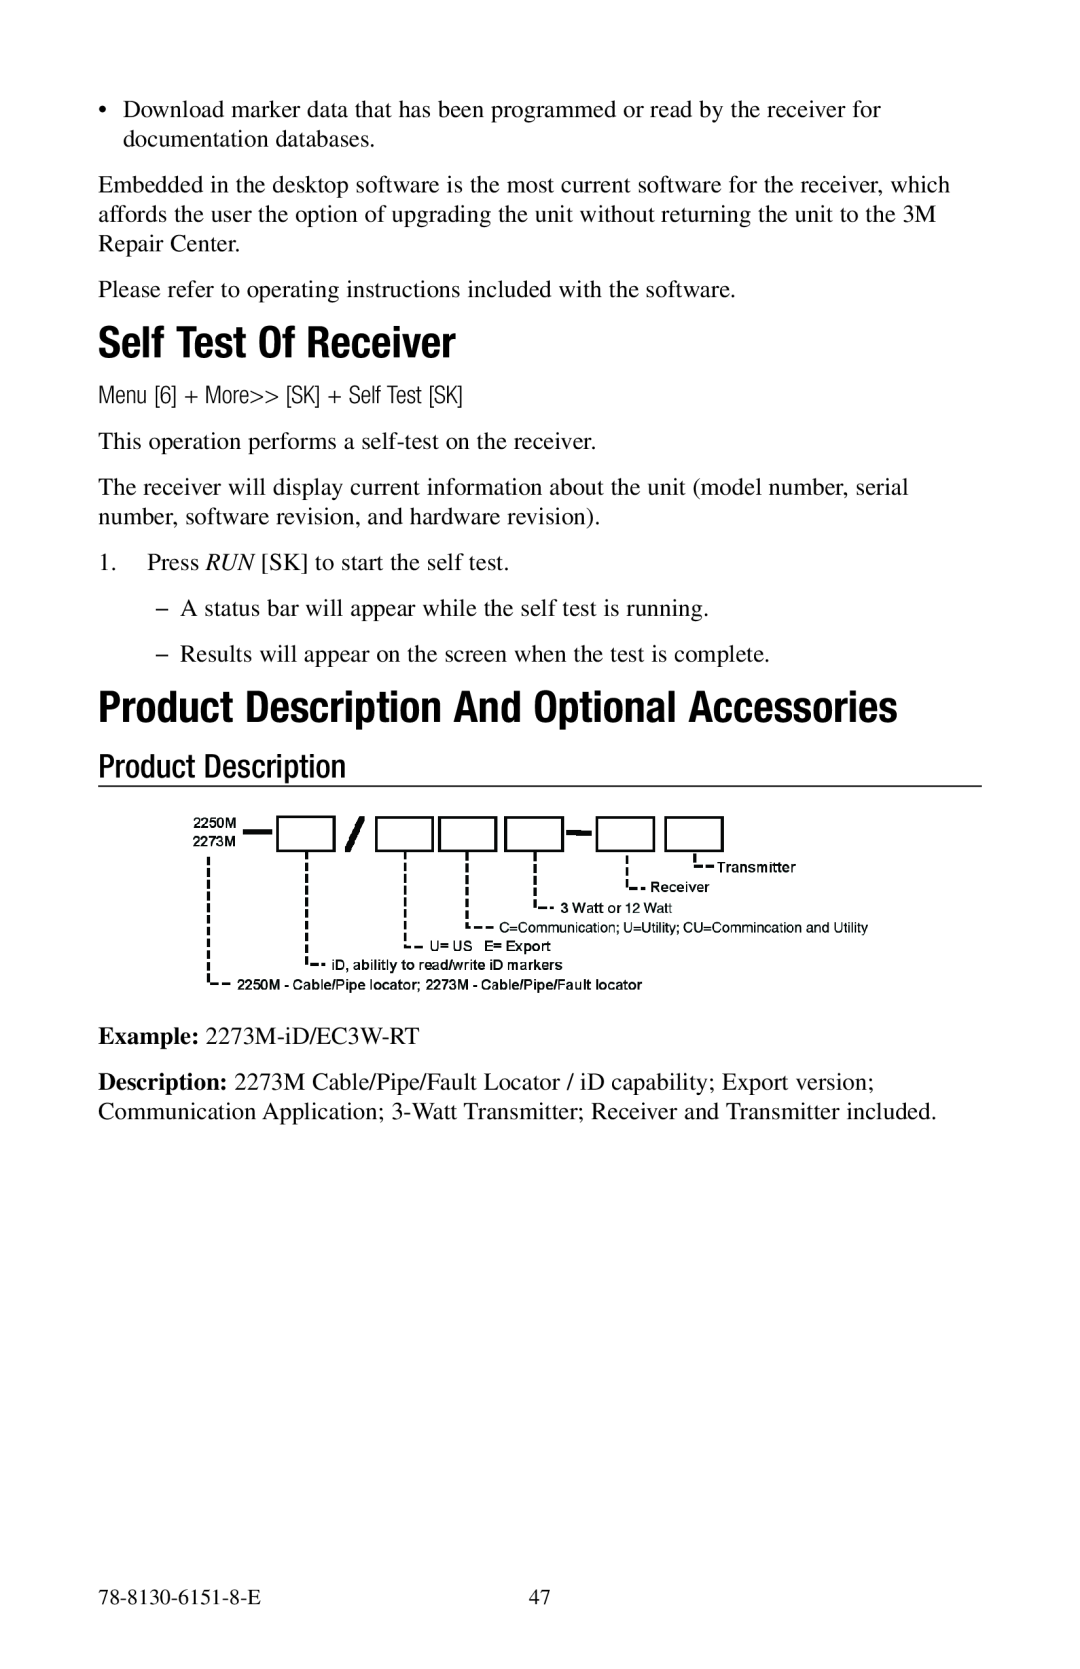 3M 2273ME-iD, 2250ME-iD manual Self Test Of Receiver, Product Description And Optional Accessories 